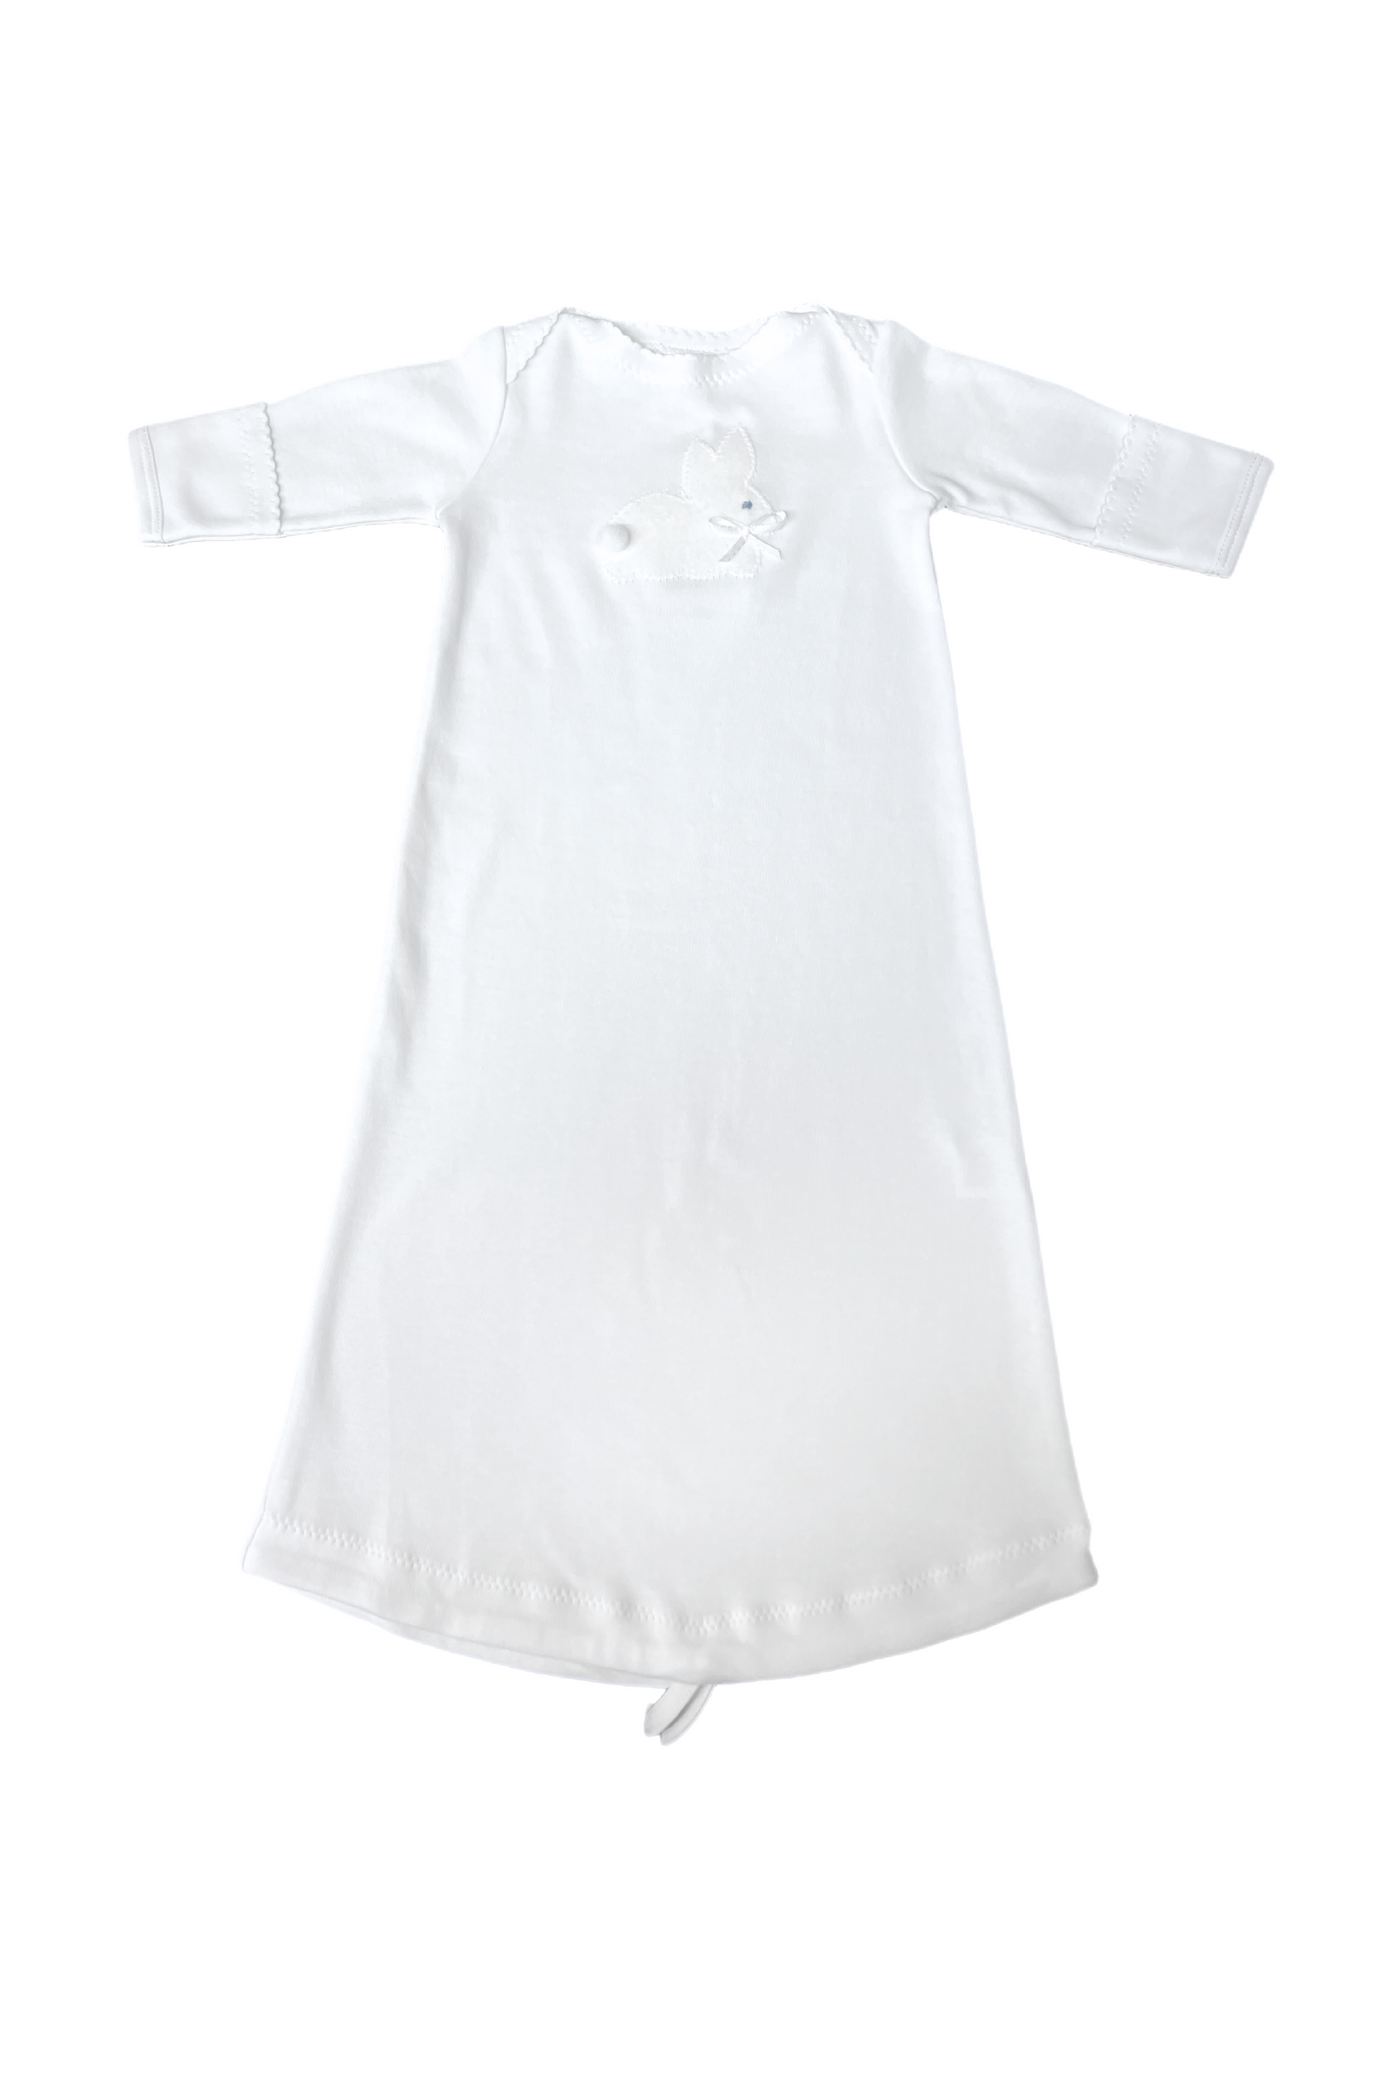 JJ Applique Day Gown White Solid Bunny